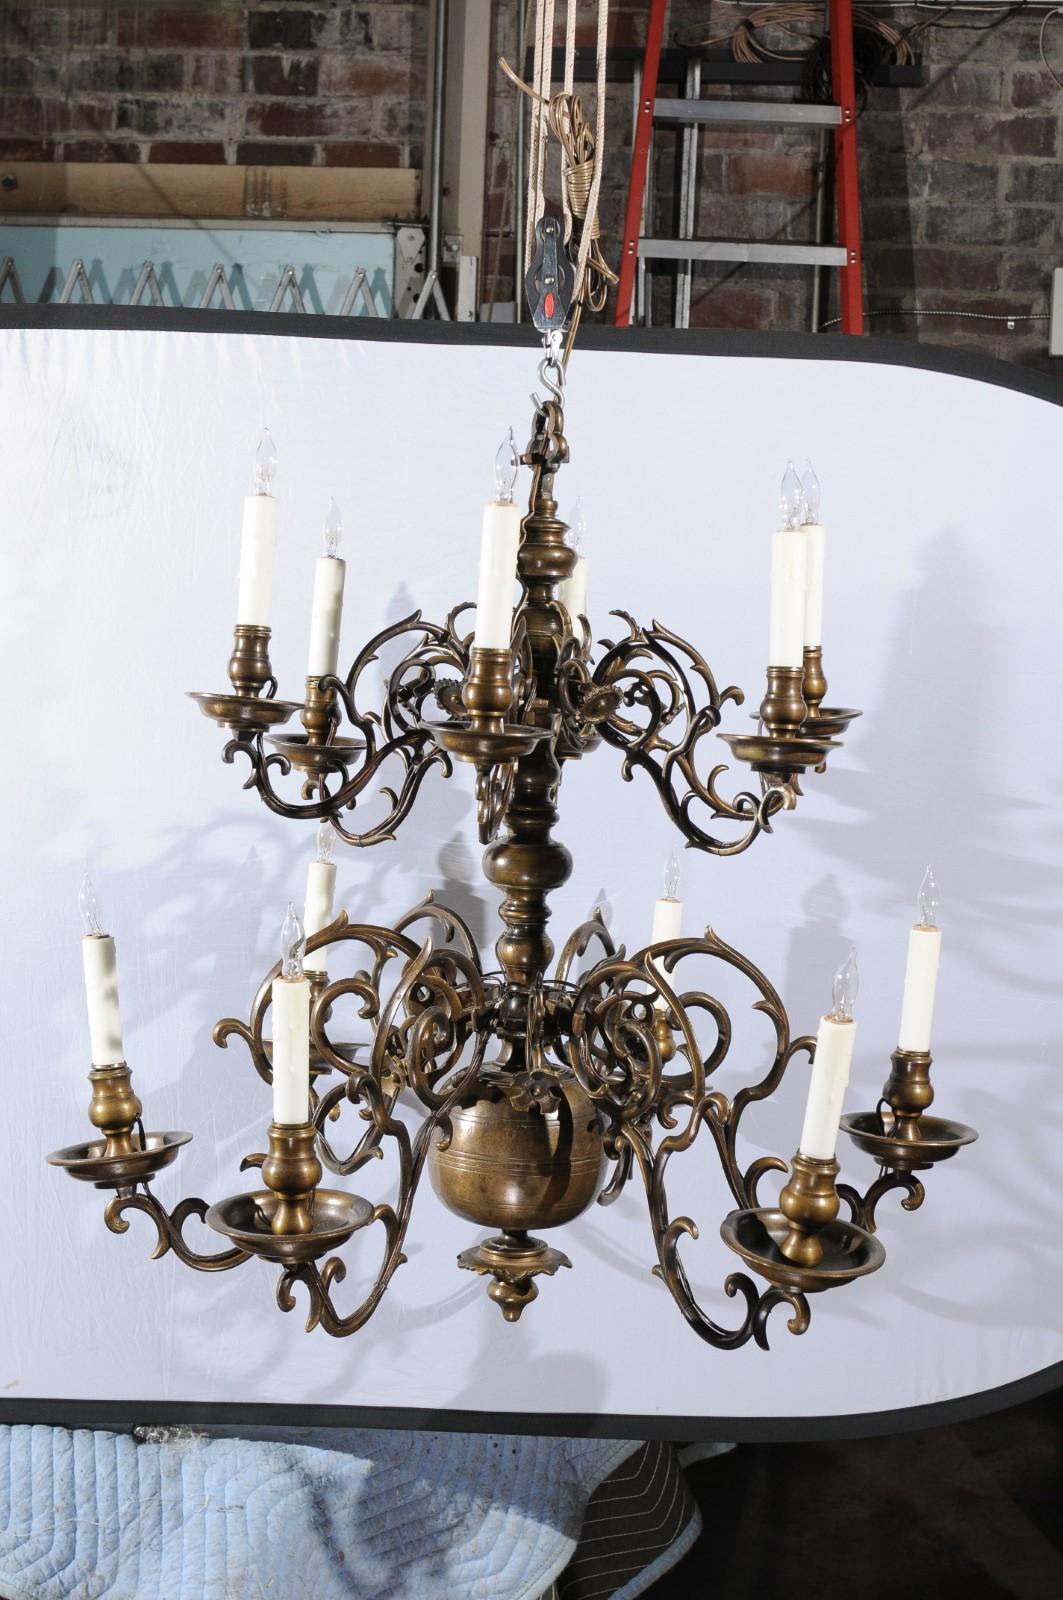 Large 2-Tier Dutch Brass Chandelier with 12 Lights, 18th Century For Sale 8